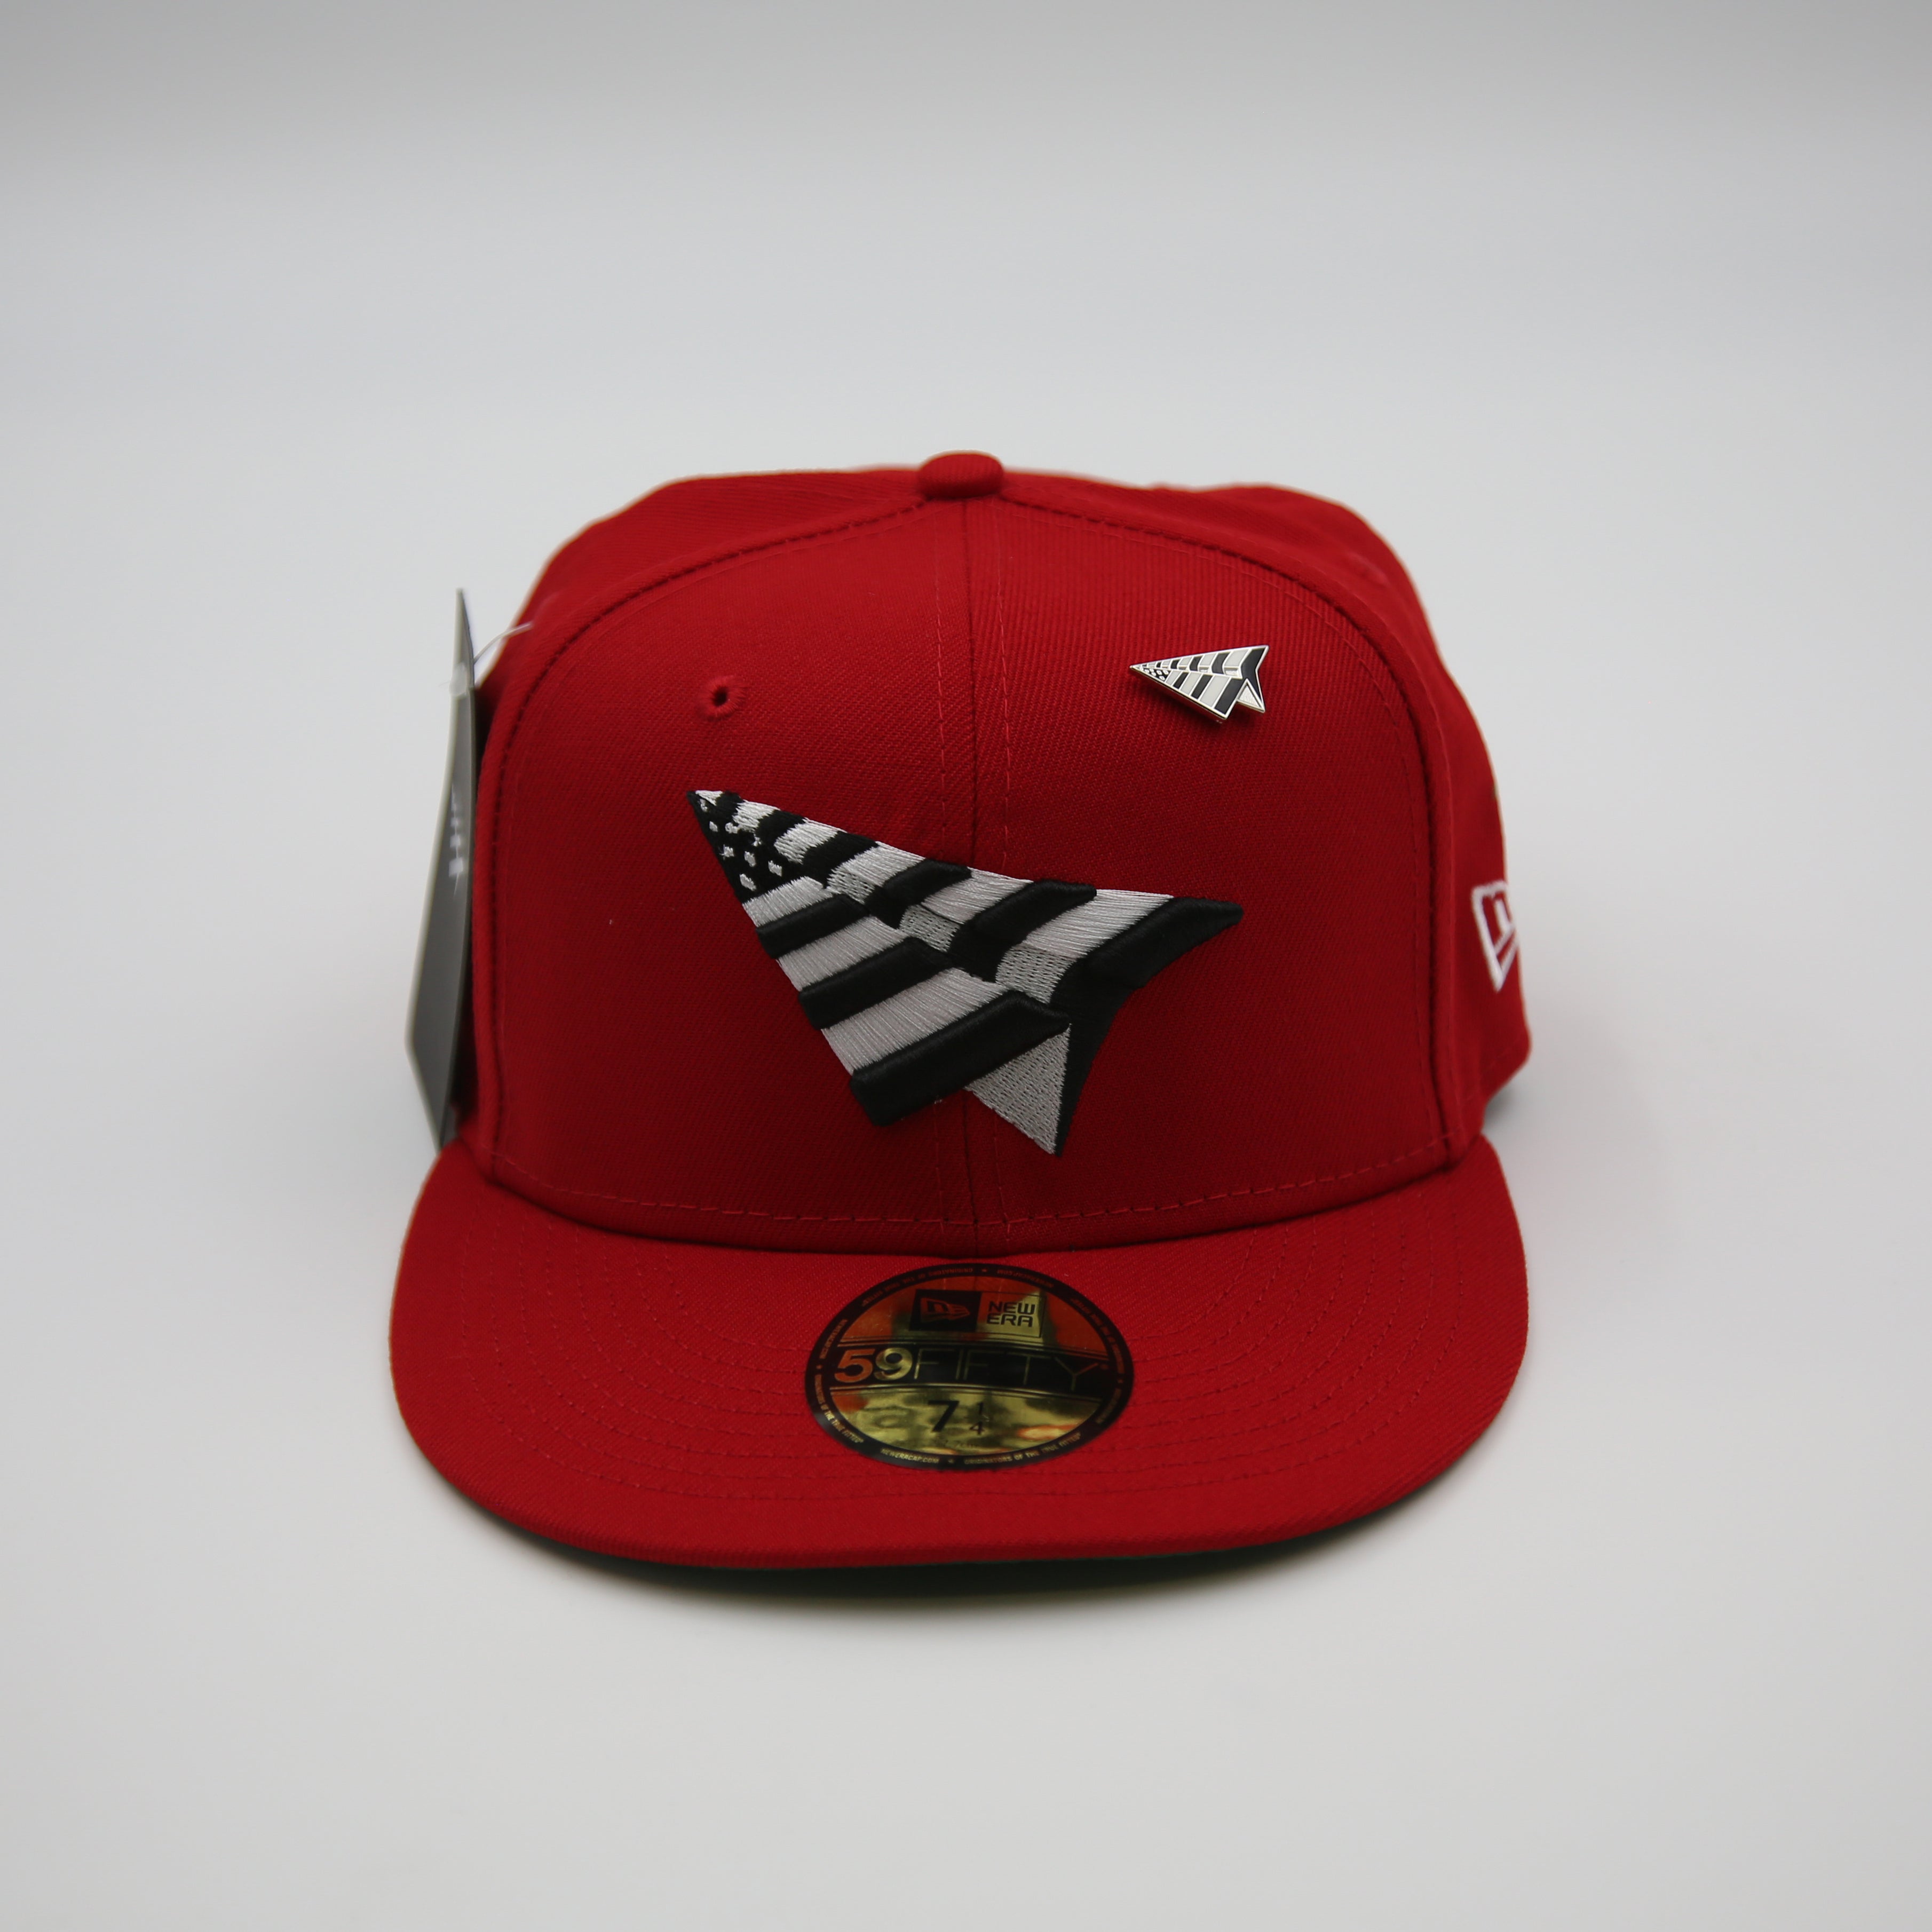 Paper Planes New Era 59FIFTY Logo Fitted Hat - Royal